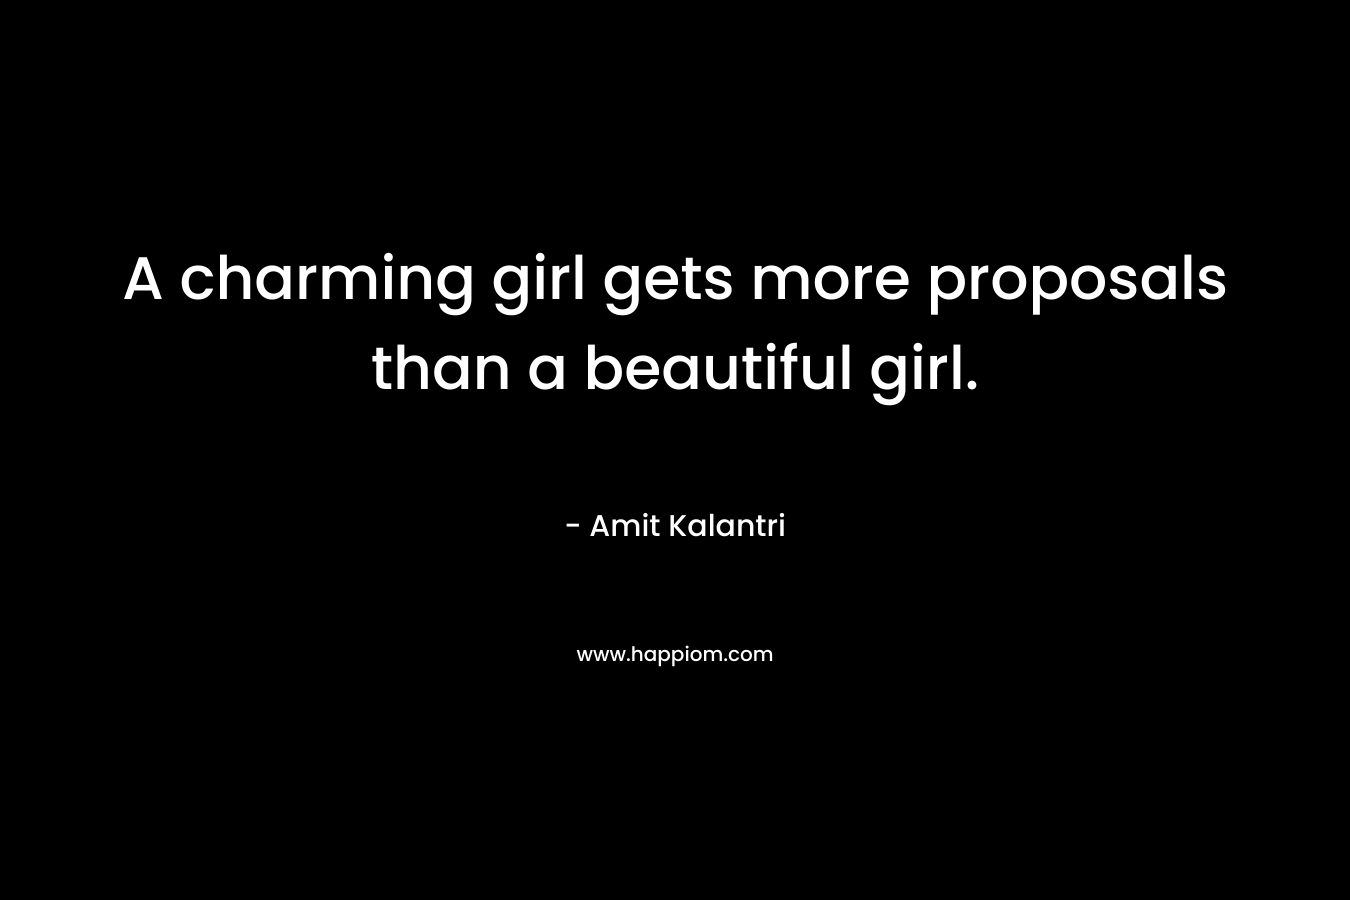 A charming girl gets more proposals than a beautiful girl.